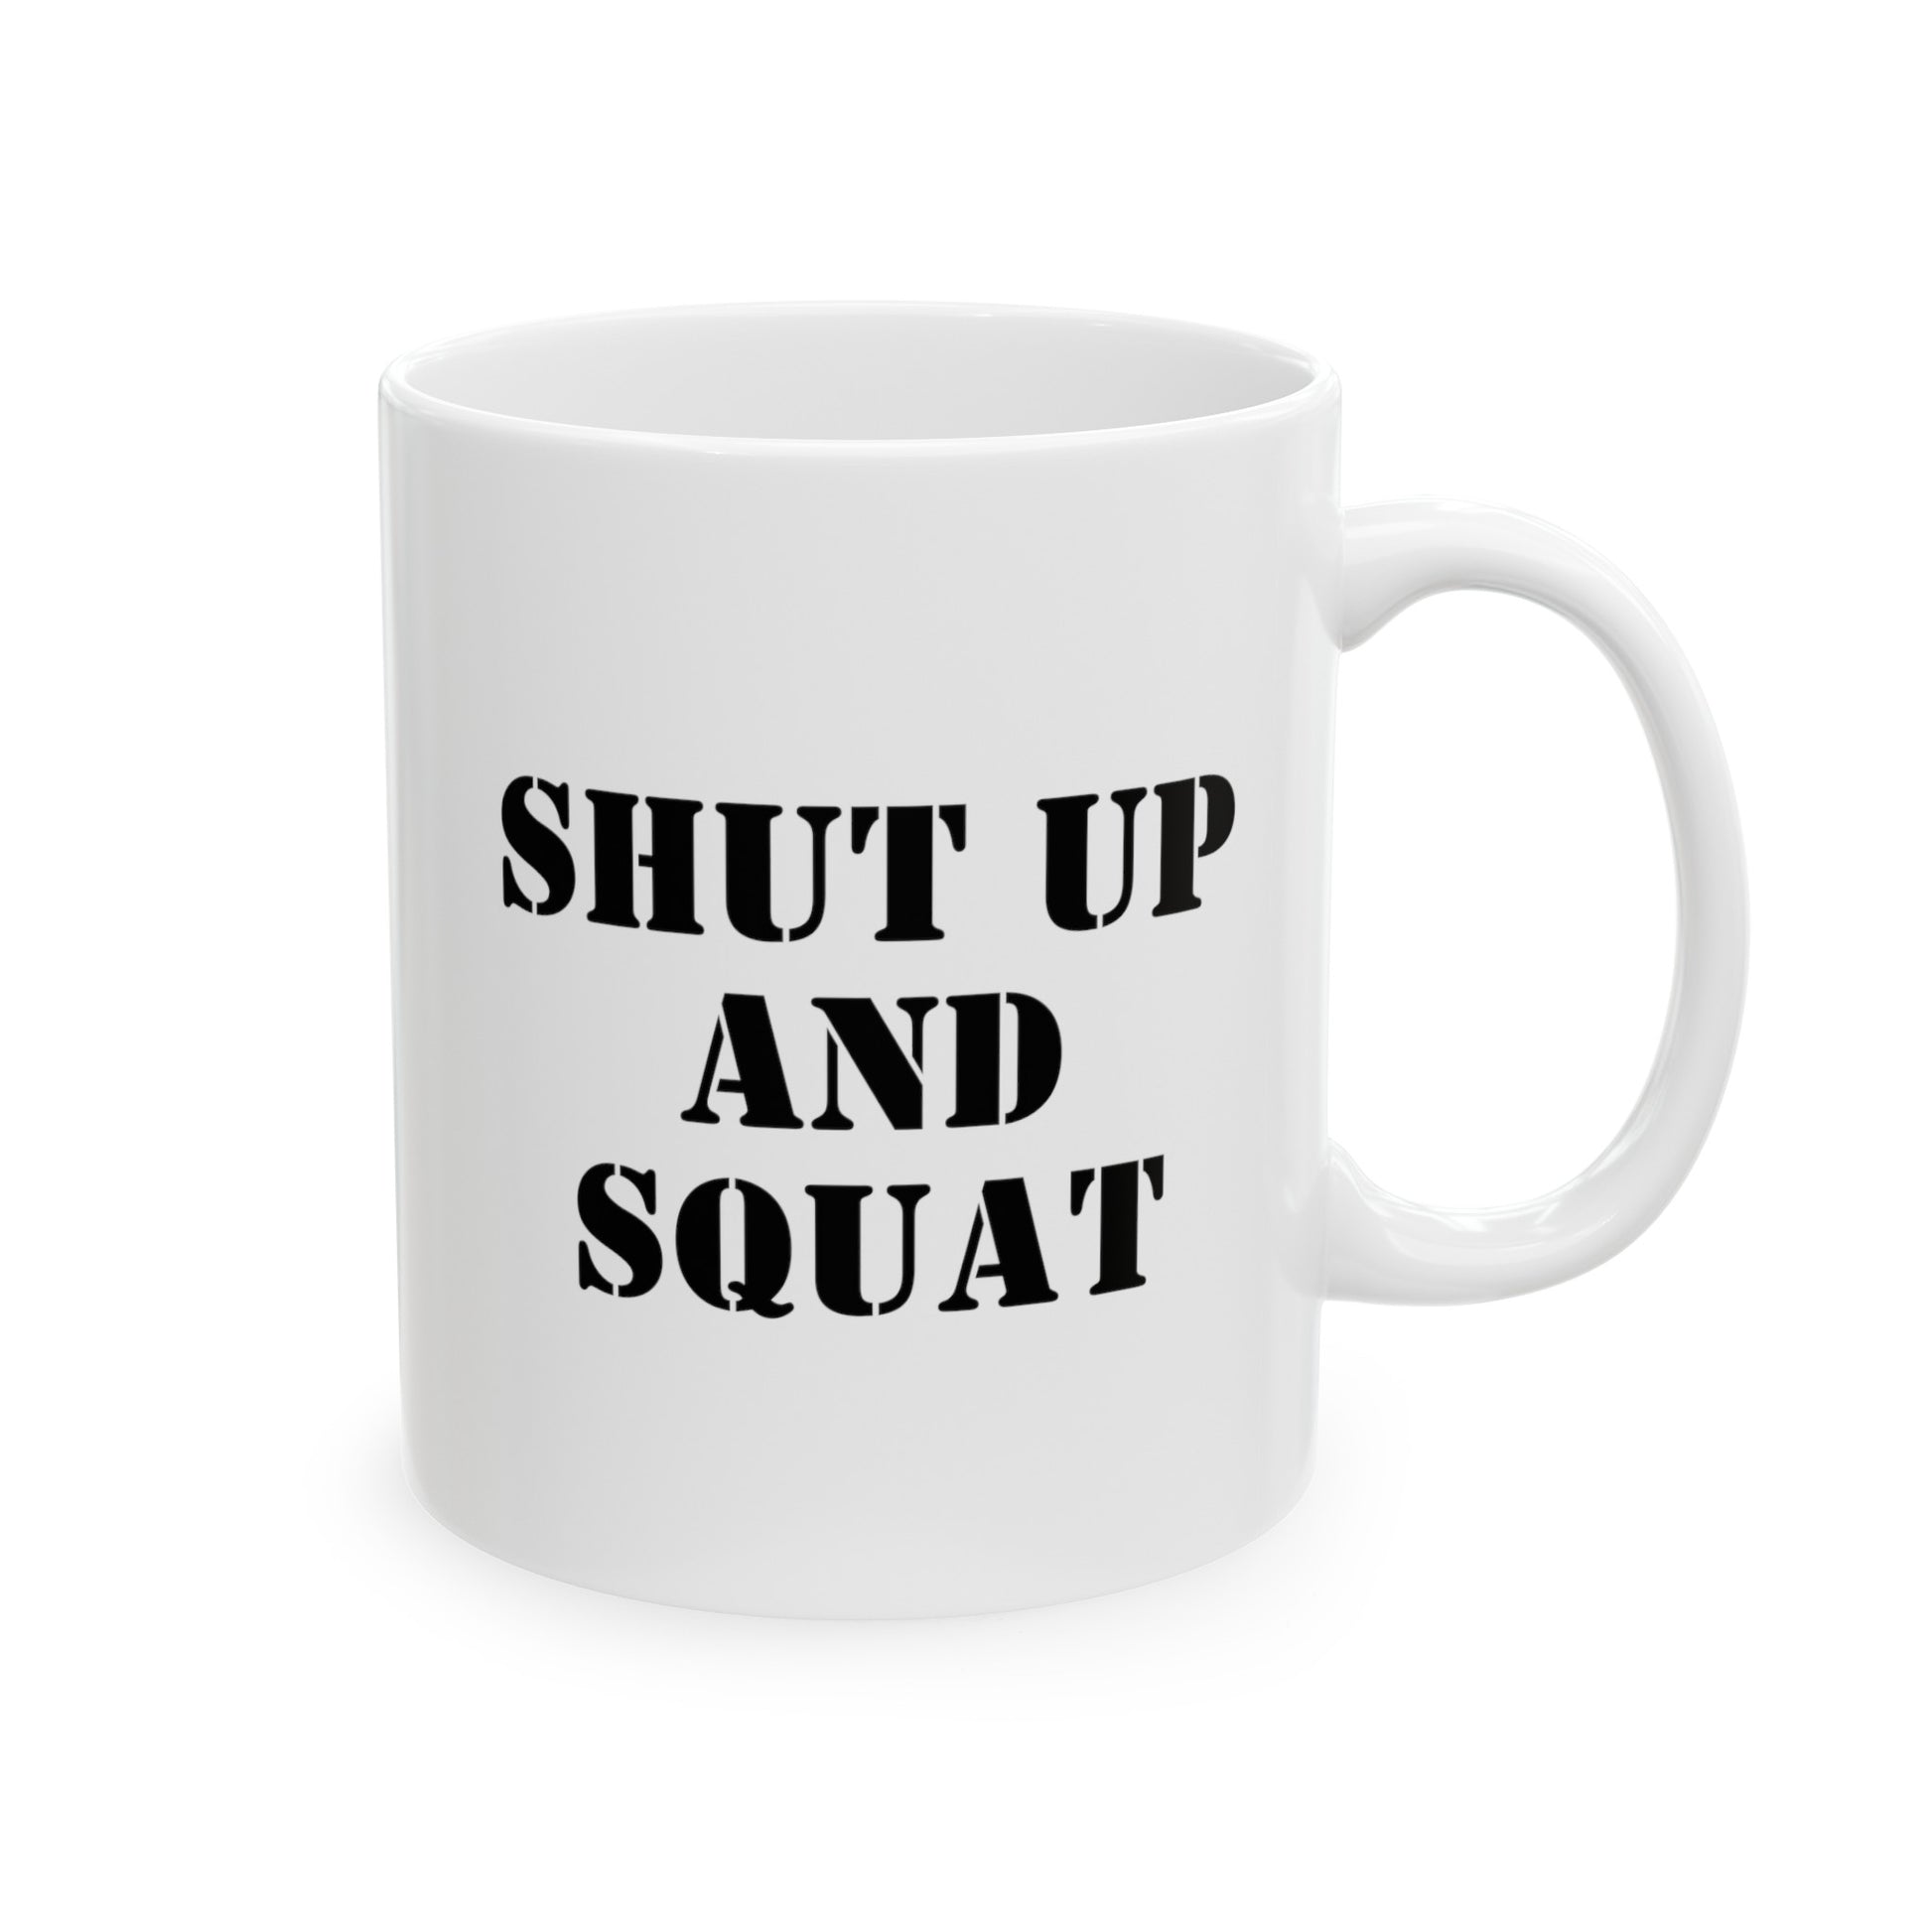 Shut Up And Squat 11oz white funny large coffee mug gift for gym rat weightlifting friend powerlifting bodybuilding work out fitness lover girl  waveywares wavey wares wavywares wavy wares